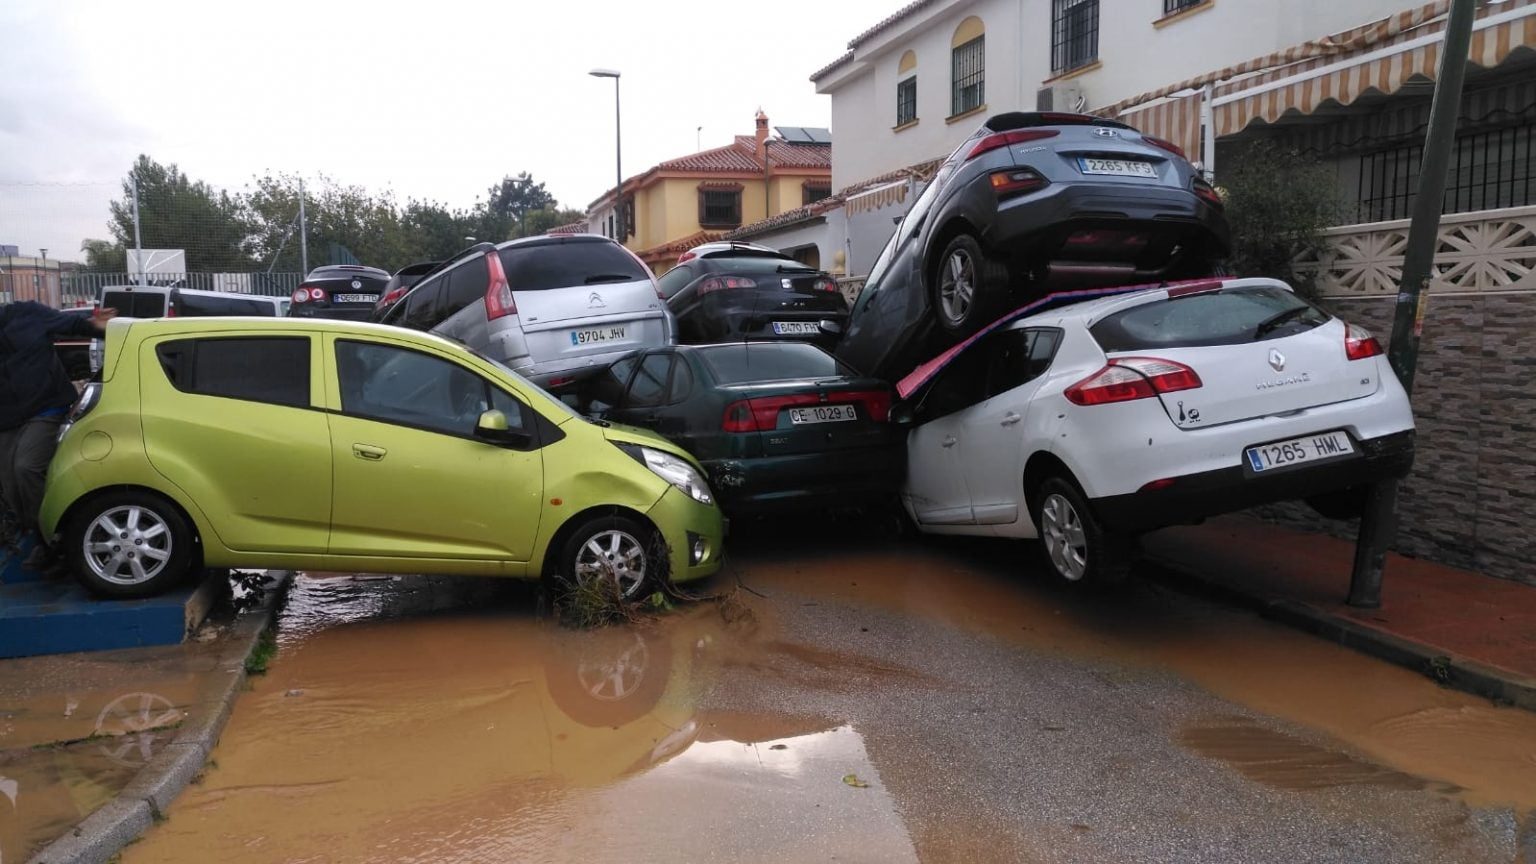 Cars have been left stacked upon one another in Campanillas